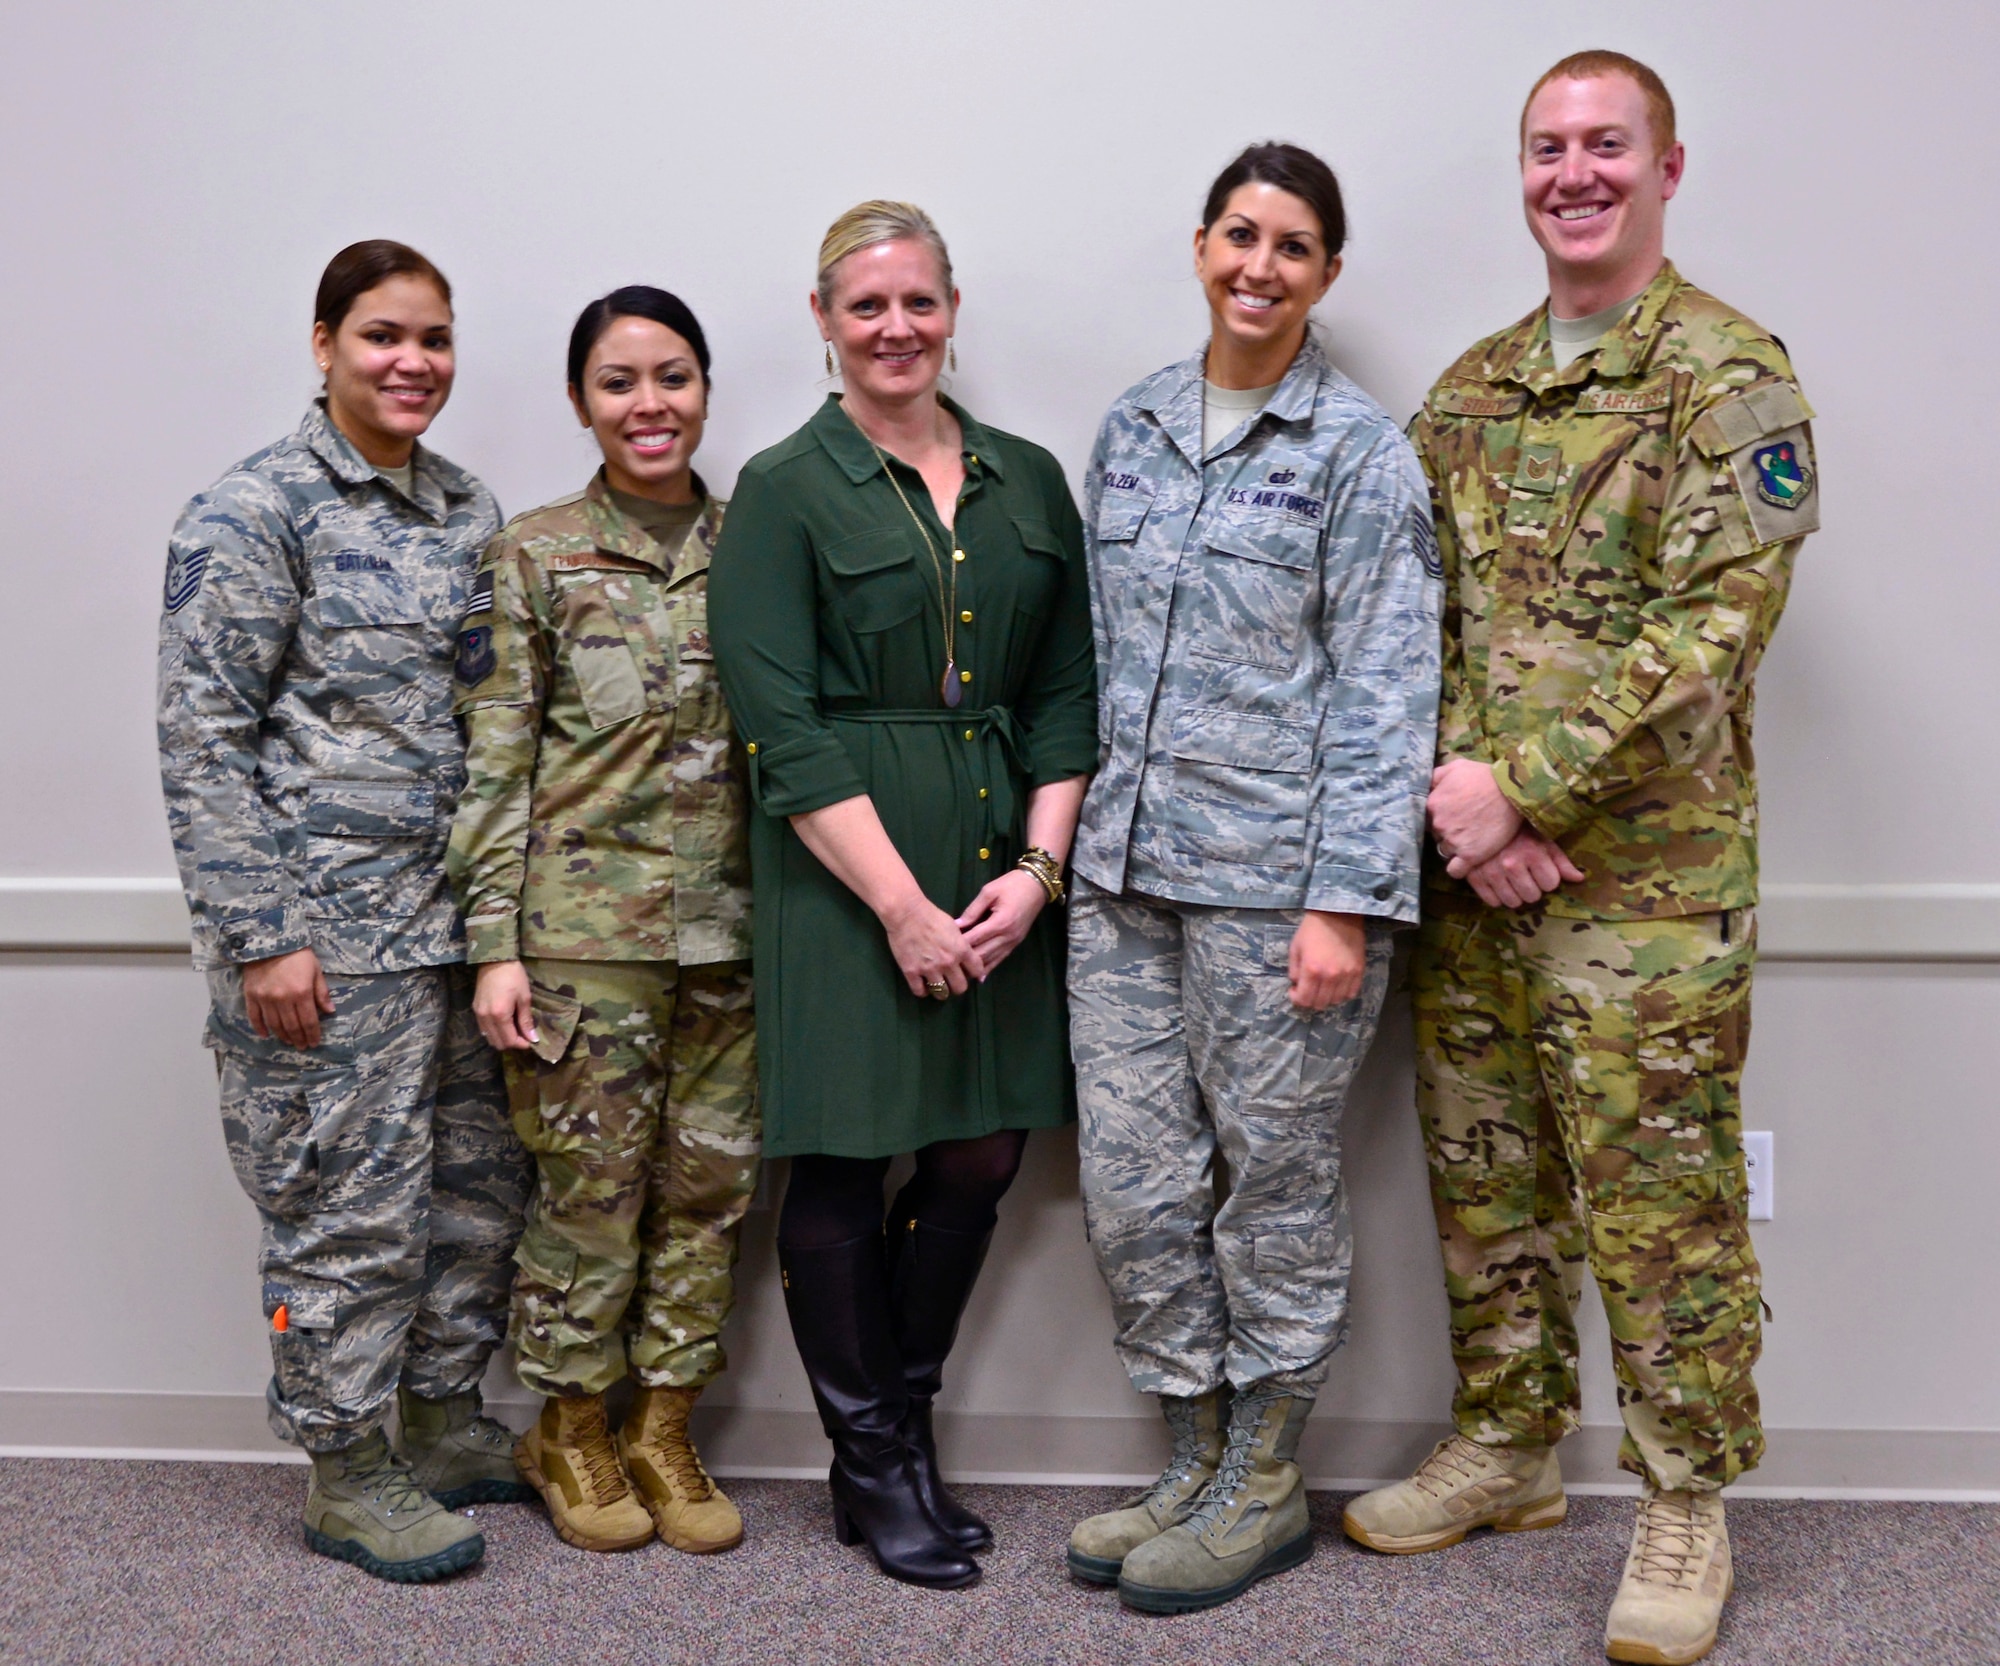 919th Special Operations Force Support Squadron's Airman and Family Readiness Center team, shown from left, includes Tech. Sgt. Rina Gatzman, Master Sgt. AnnJill Transfiguracion, Kelly Ewert, Tech. Sgt. Molly Holzem and Tech. Sgt. William Steele.